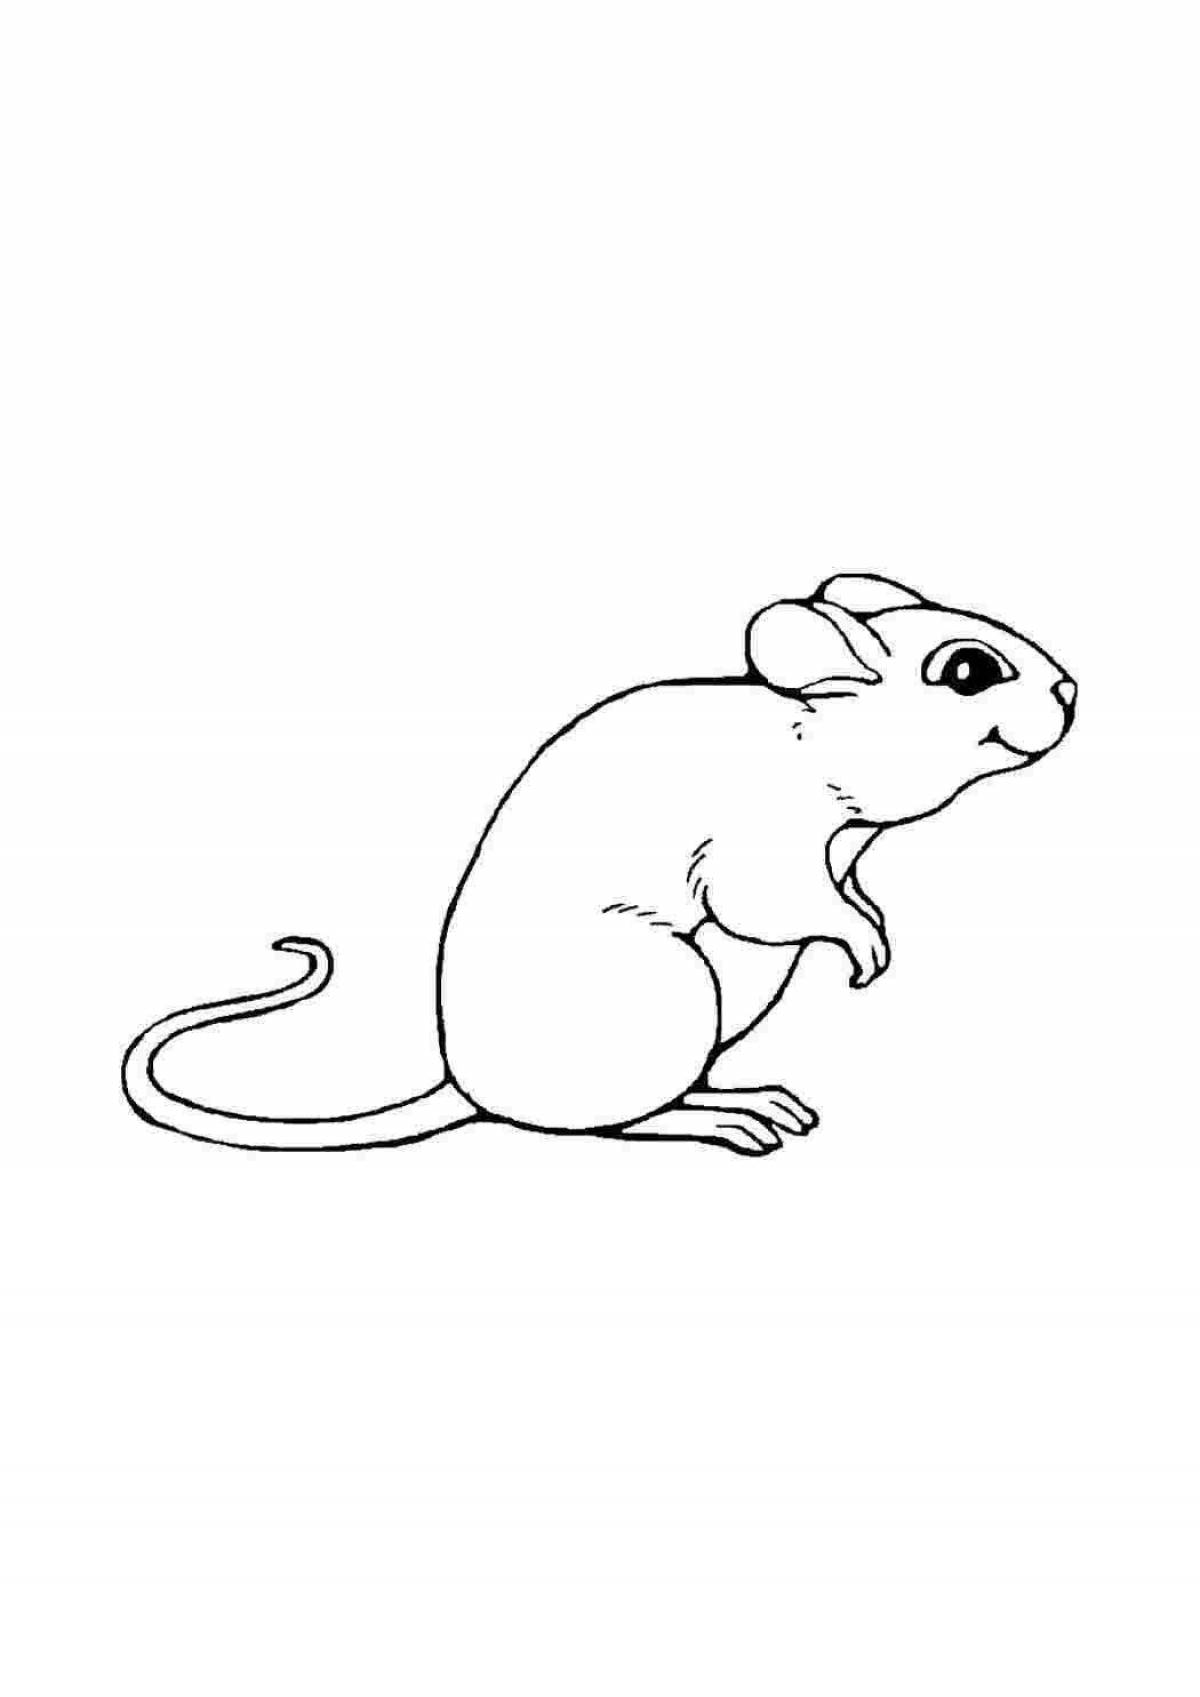 Coloring cute rodent